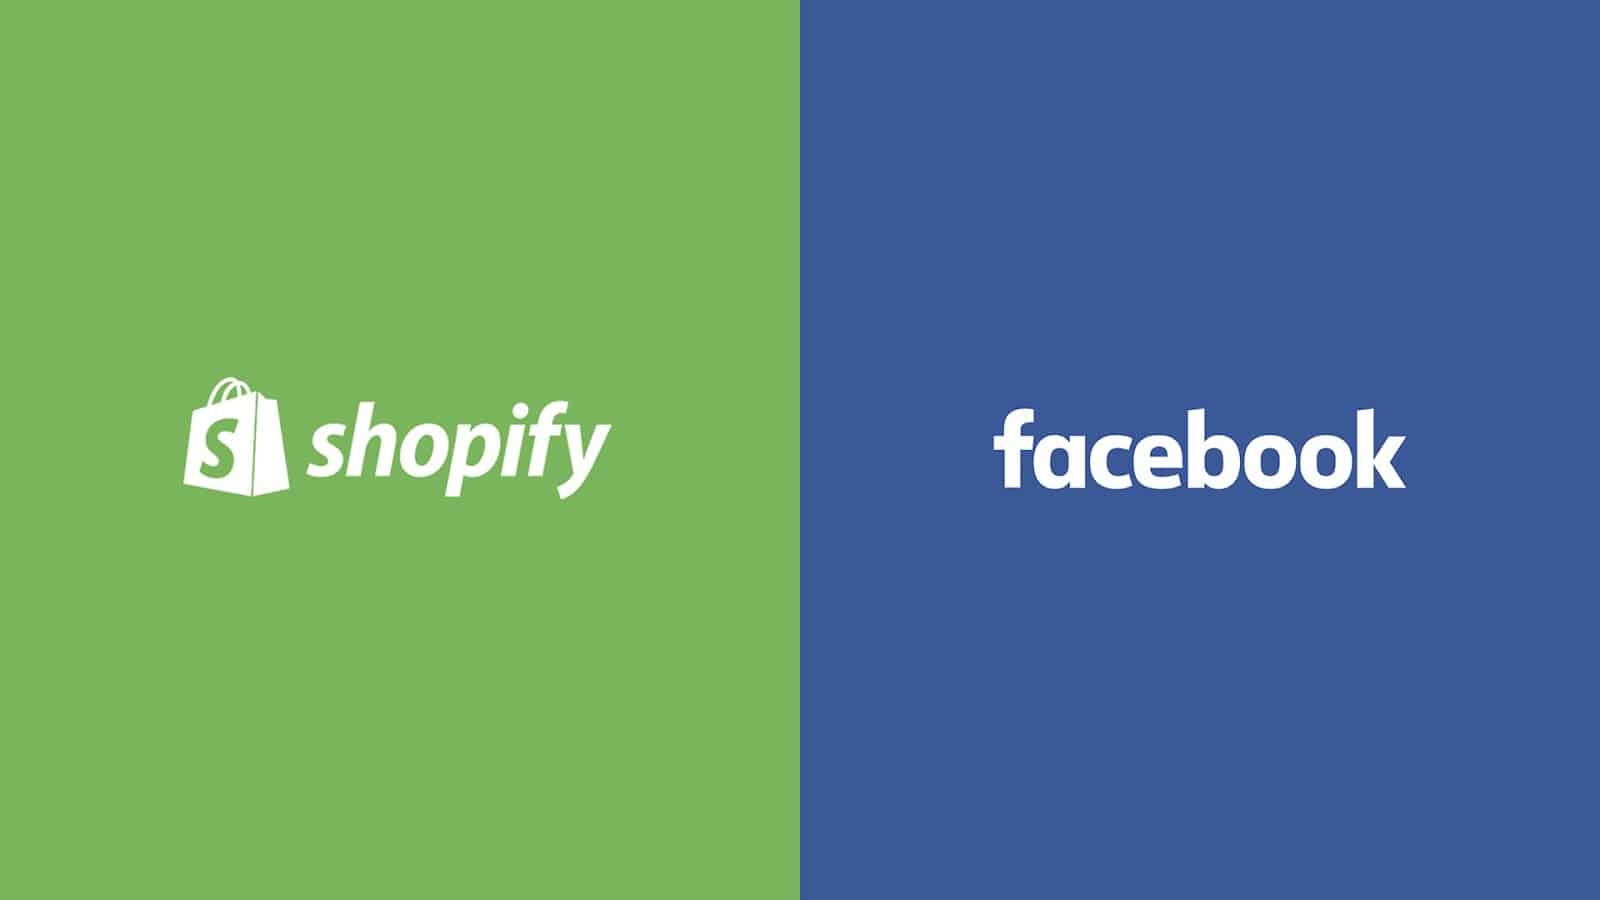 What is Facebook Shop and Shopify?